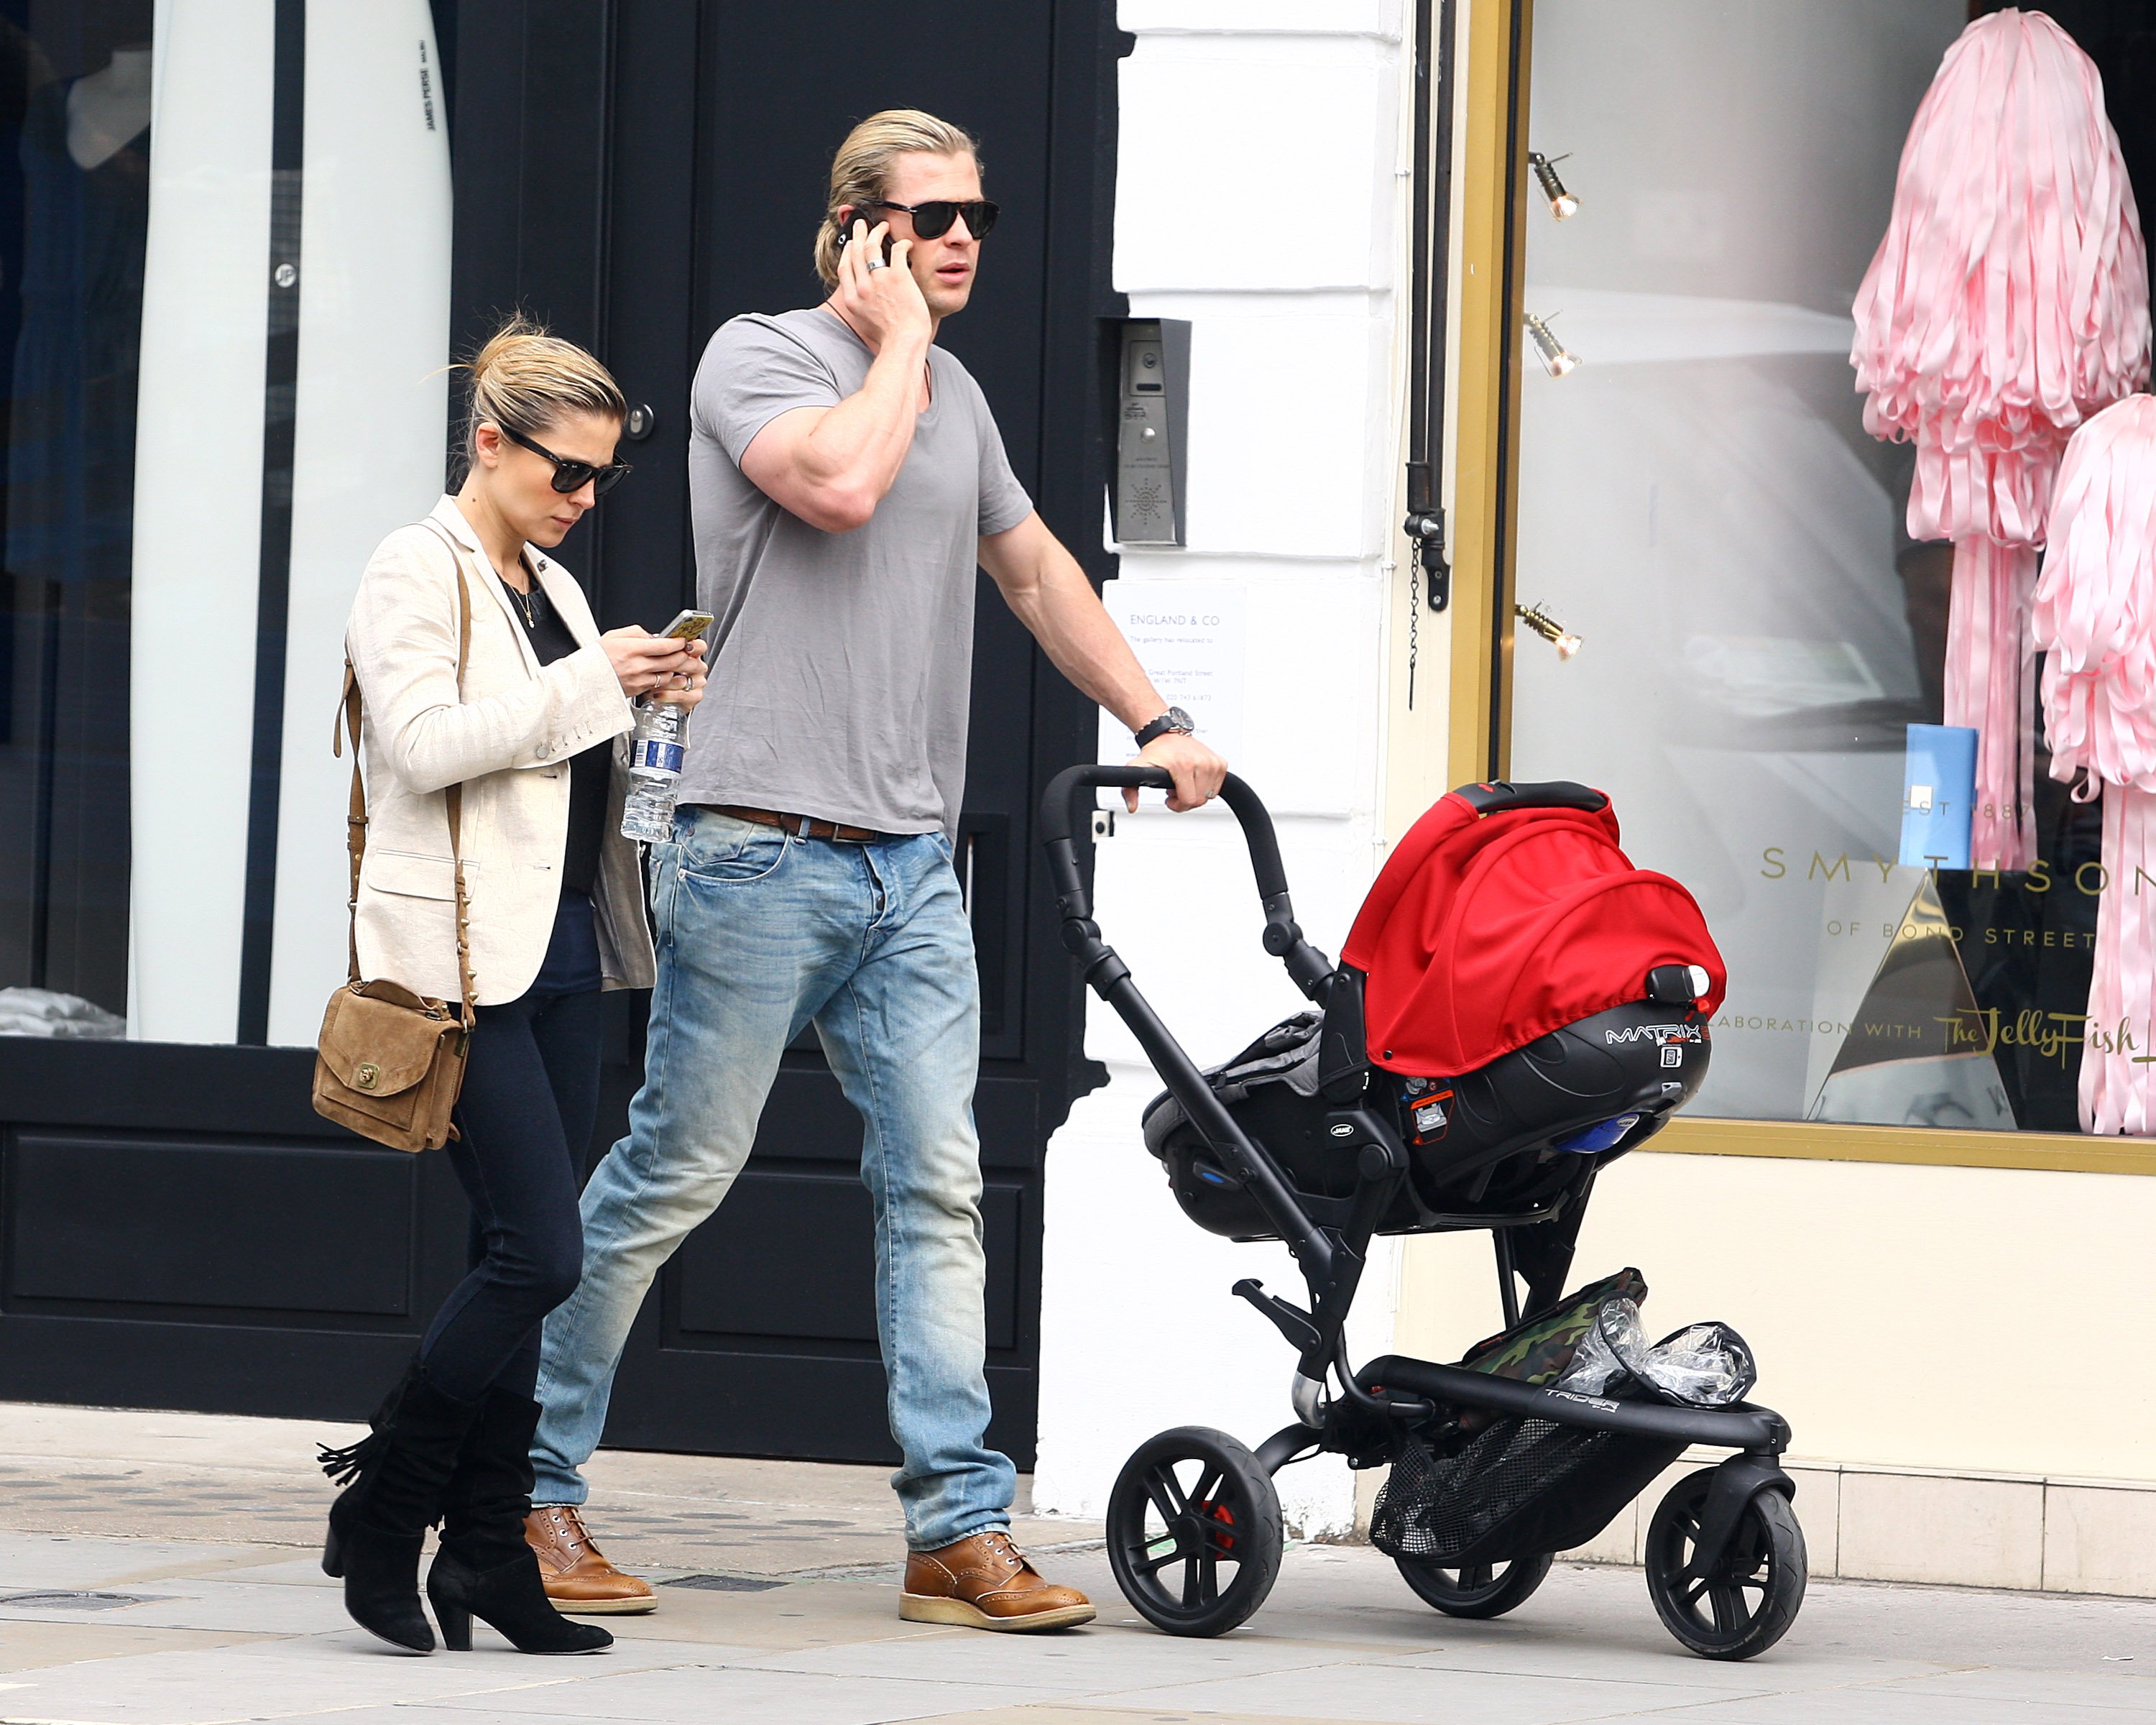 Chris Hemsworth and his wife Elsa Pataky | Source: Getty Images